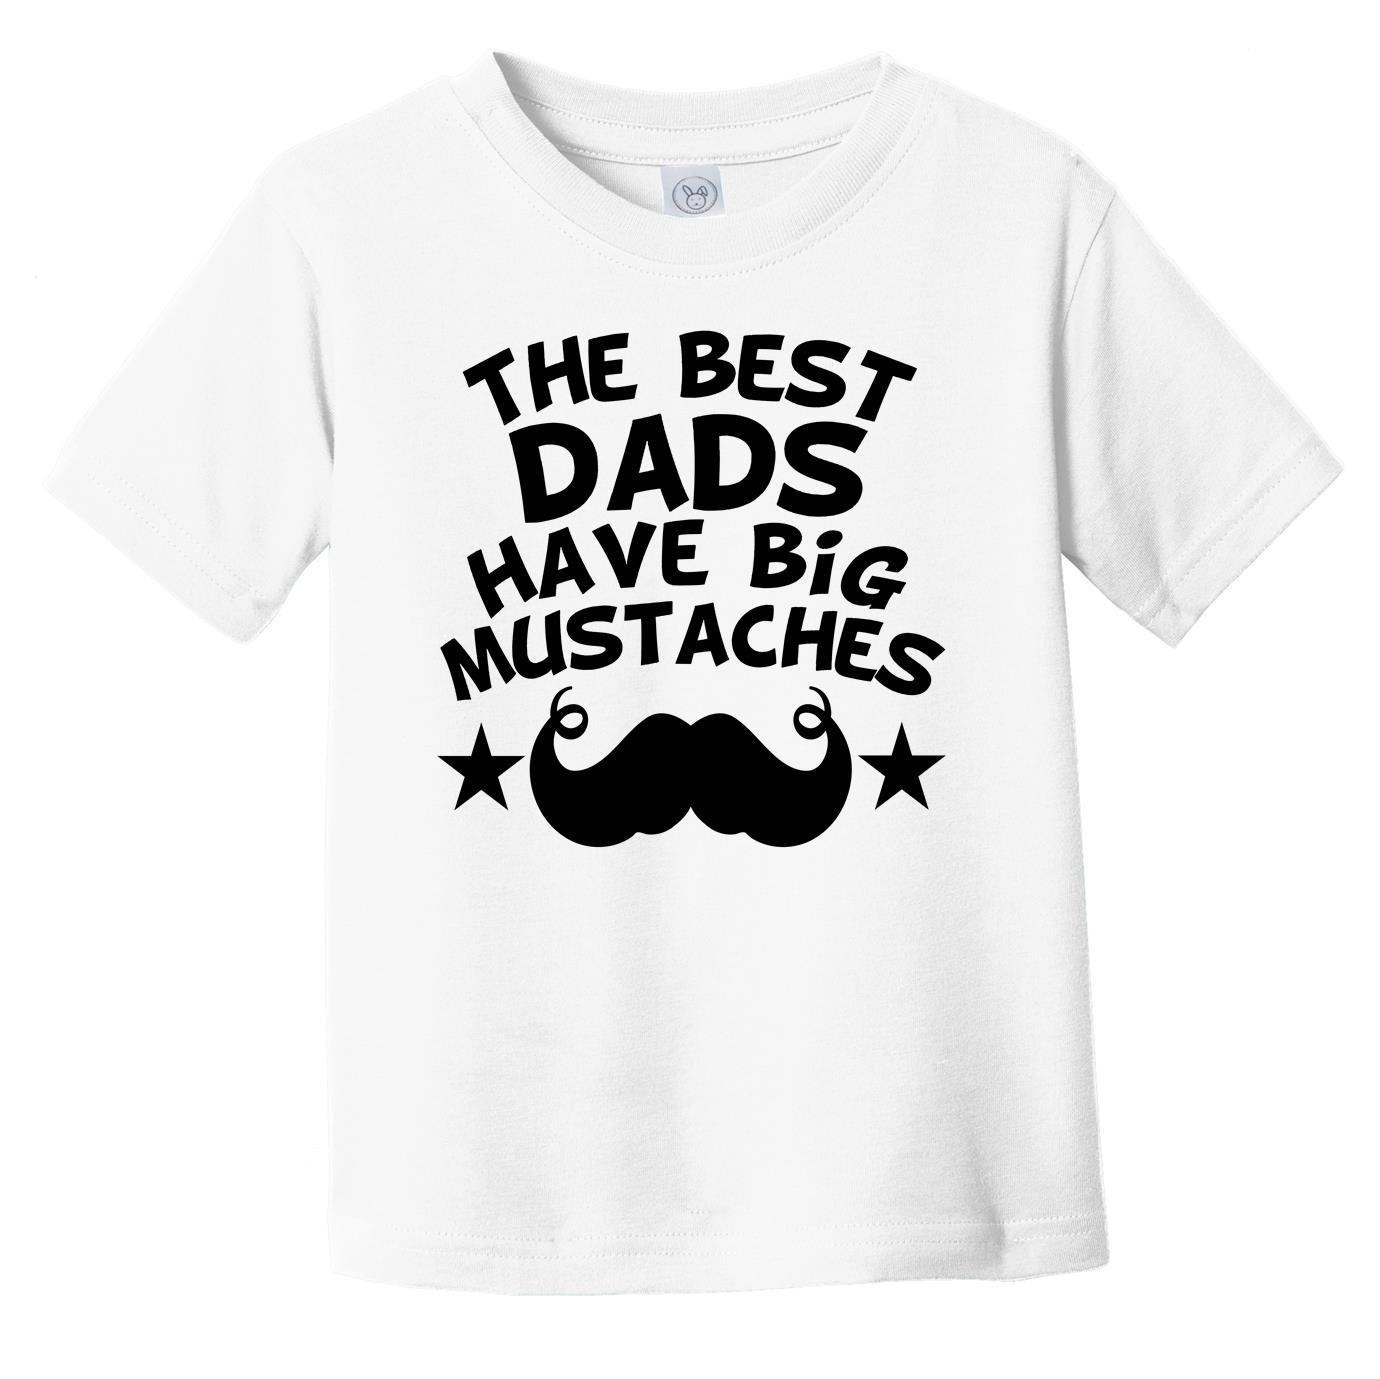 The Best Dads Have Big Mustaches T-Shirt - Funny Infant Toddler Shirt